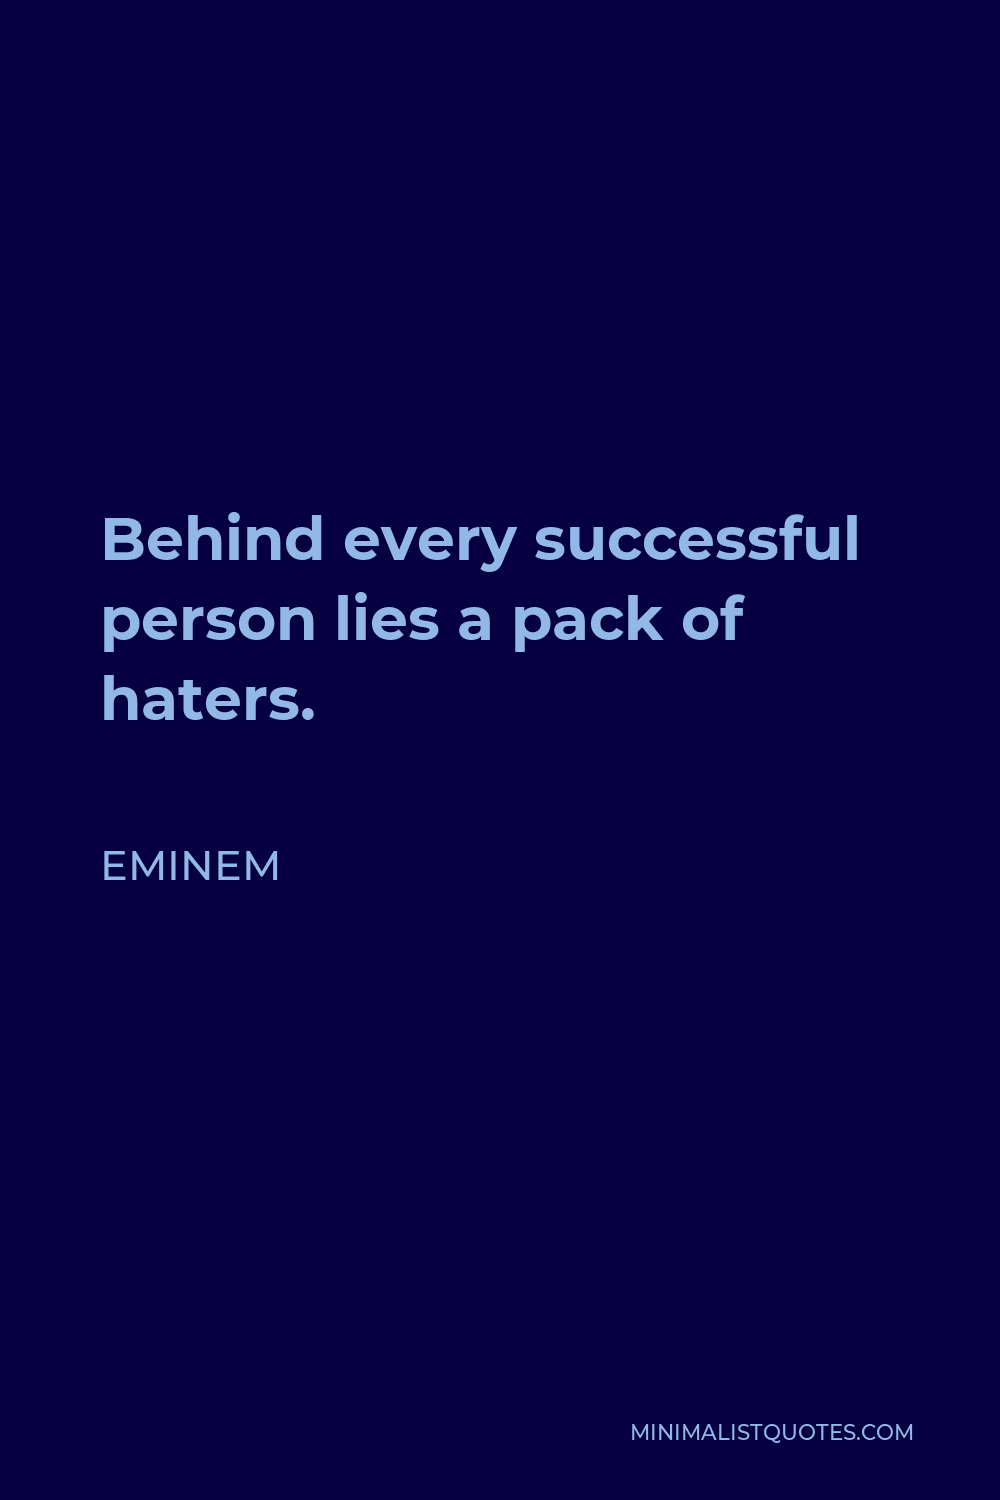 Eminem Quote - Behind every successful person lies a pack of haters.